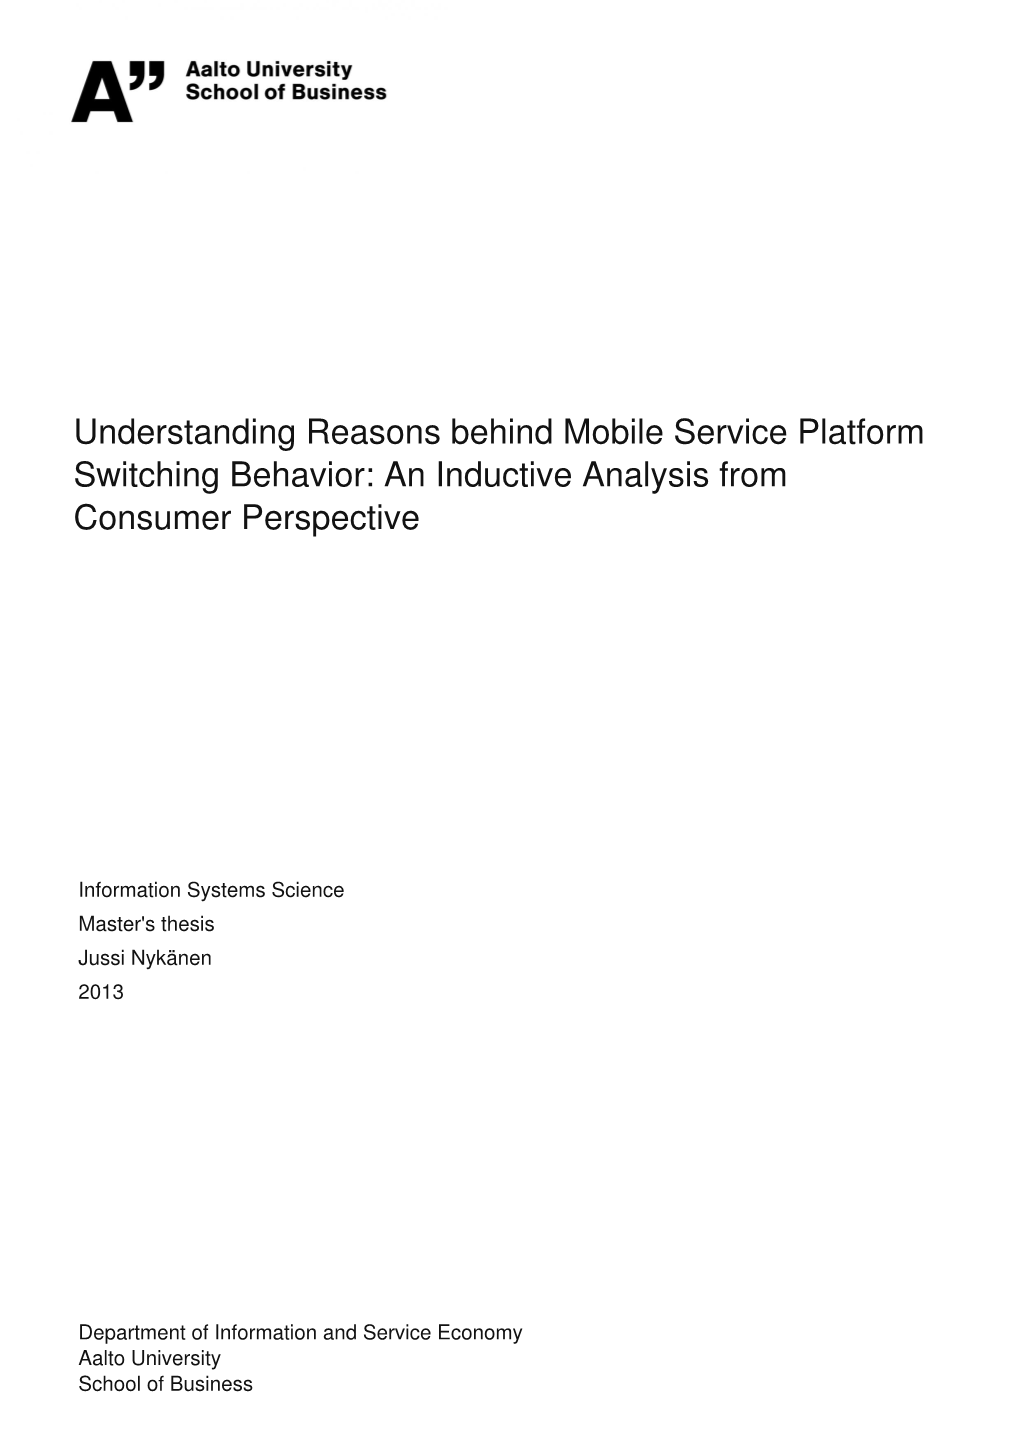 Understanding Reasons Behind Mobile Service Platform Switching Behavior: an Inductive Analysis from Consumer Perspective